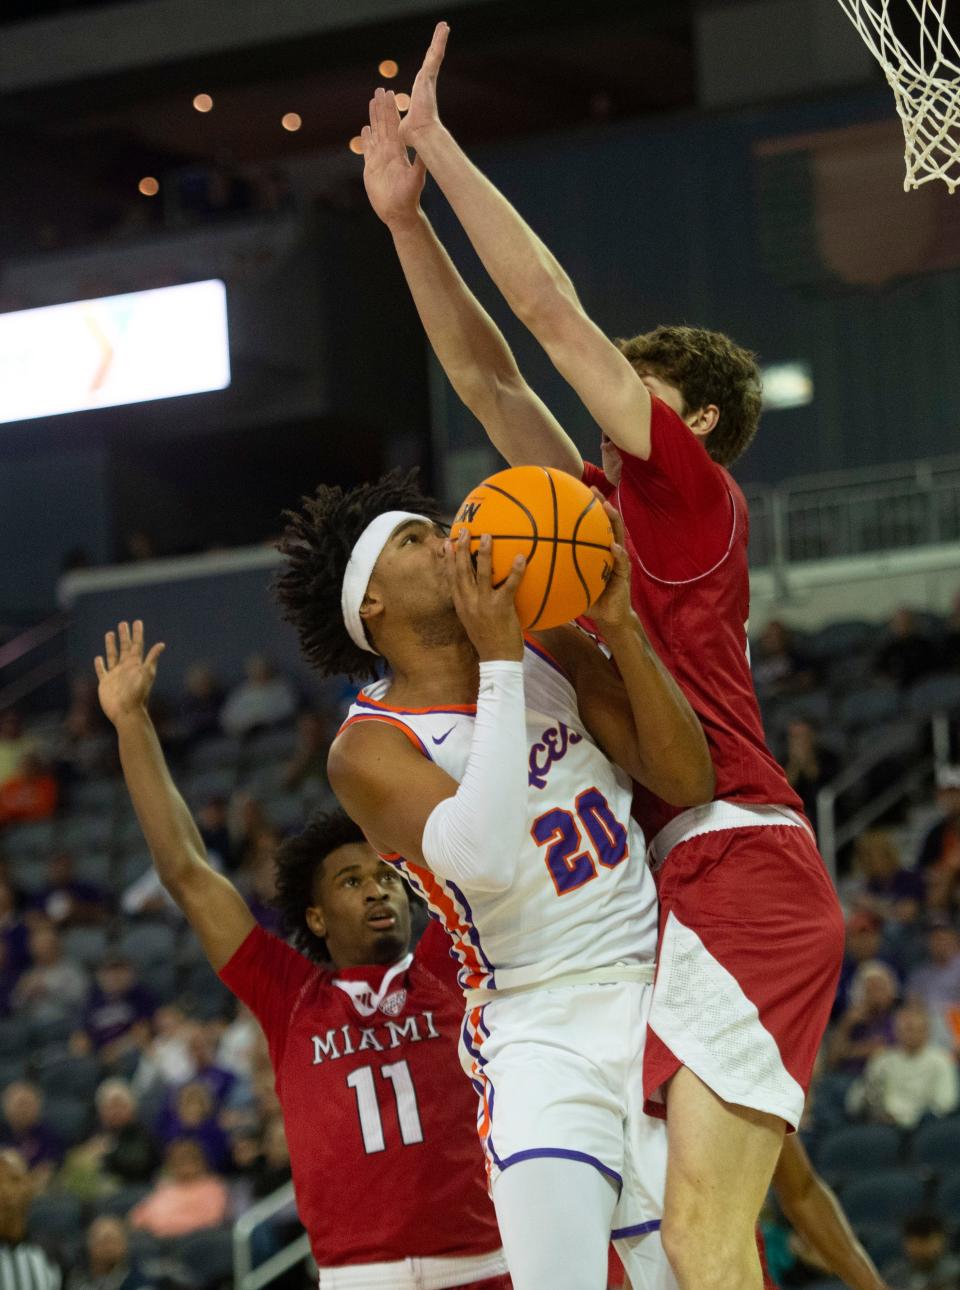 Evansville’s Kenny Strawbridge Jr. (20) goes up against Maimi Ohio’s Reece Potter (35) as the University of Evansville Purple Aces play the Miami (Ohio) University Redhawks at Ford Center in Evansville, Ind., Monday, Nov. 6, 2023.